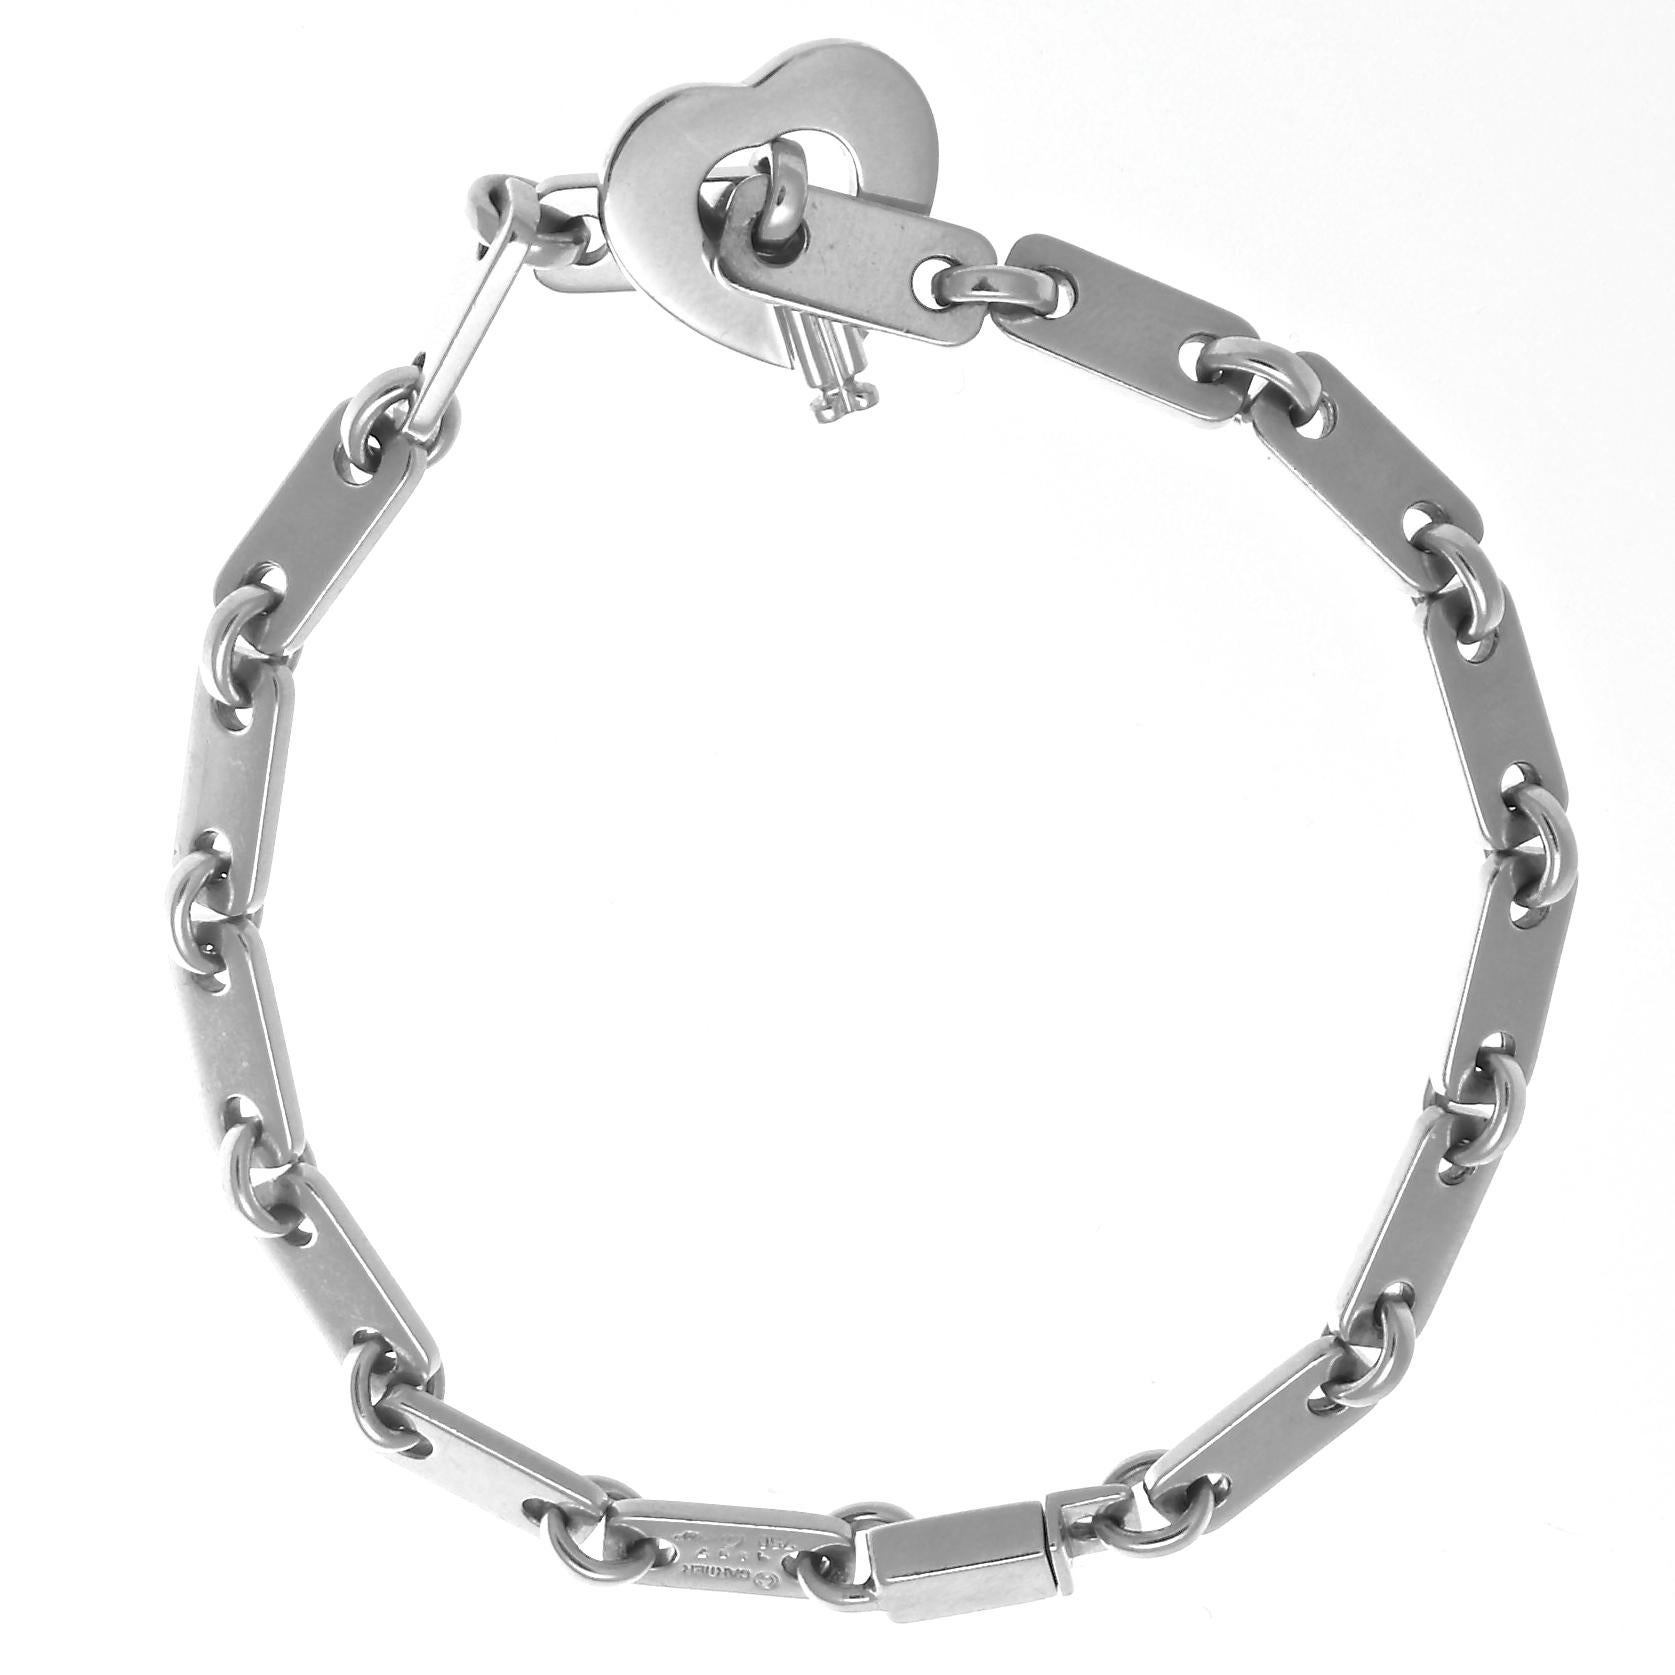 The perfect 18k white gold link bracelet with a beautiful open heart clasp, from Cartier France. Circa 1997, and measures 7 1/4 inches long. Signed Cartier and includes serial numbers. Add to your wrist stack or wear it alone, but wear it everyday